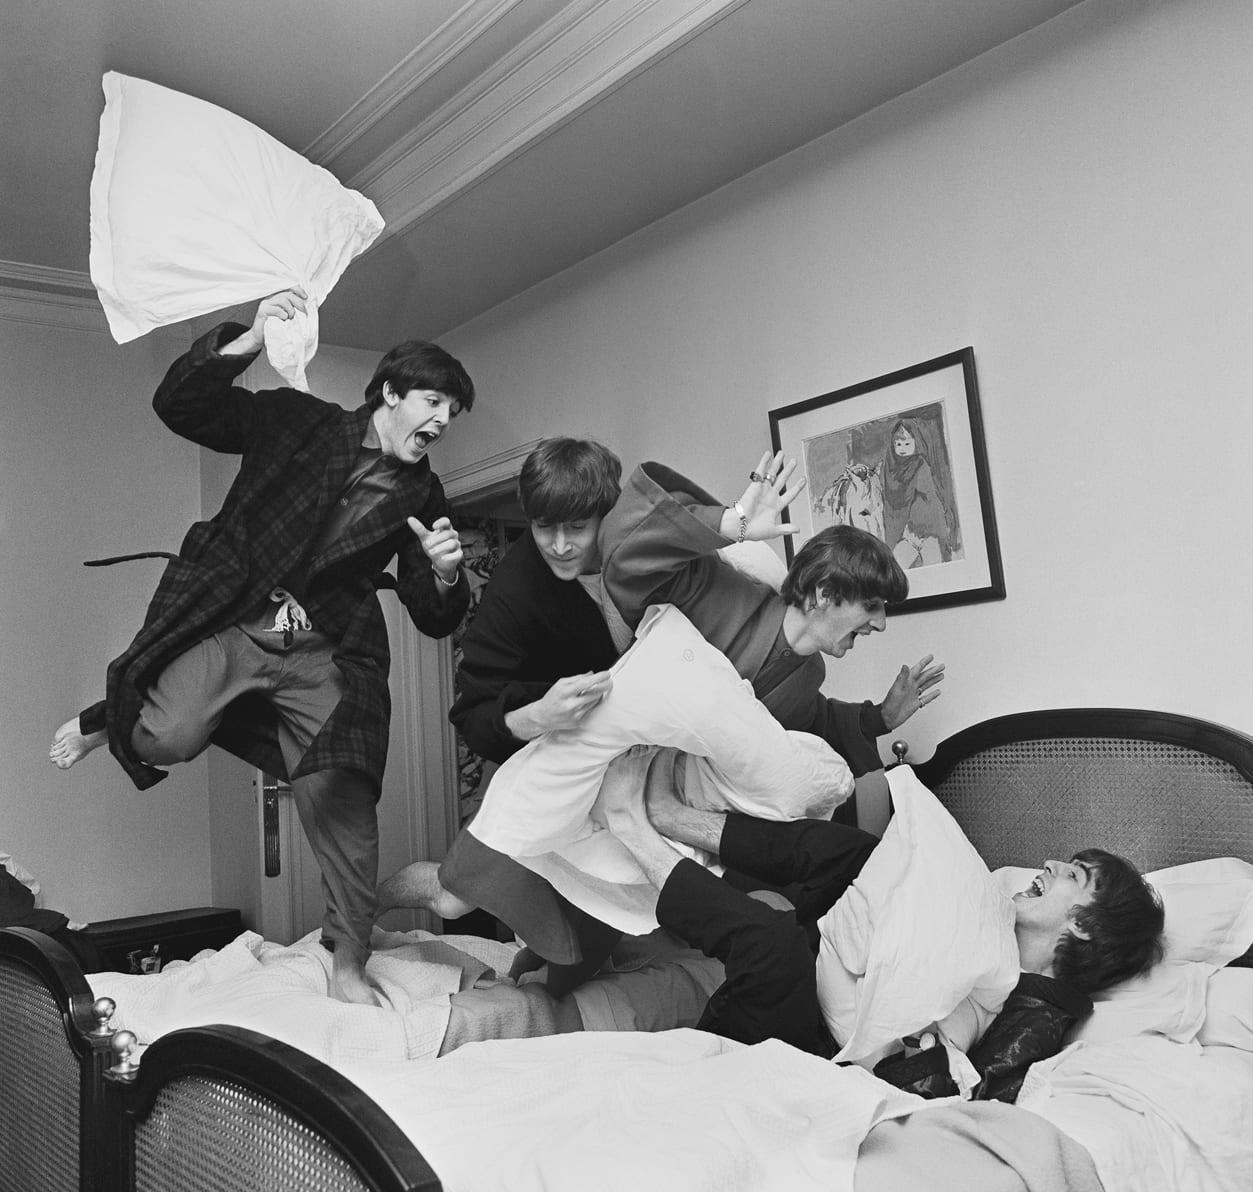 Harry Benson Black and White Photograph - The Pillow Fight